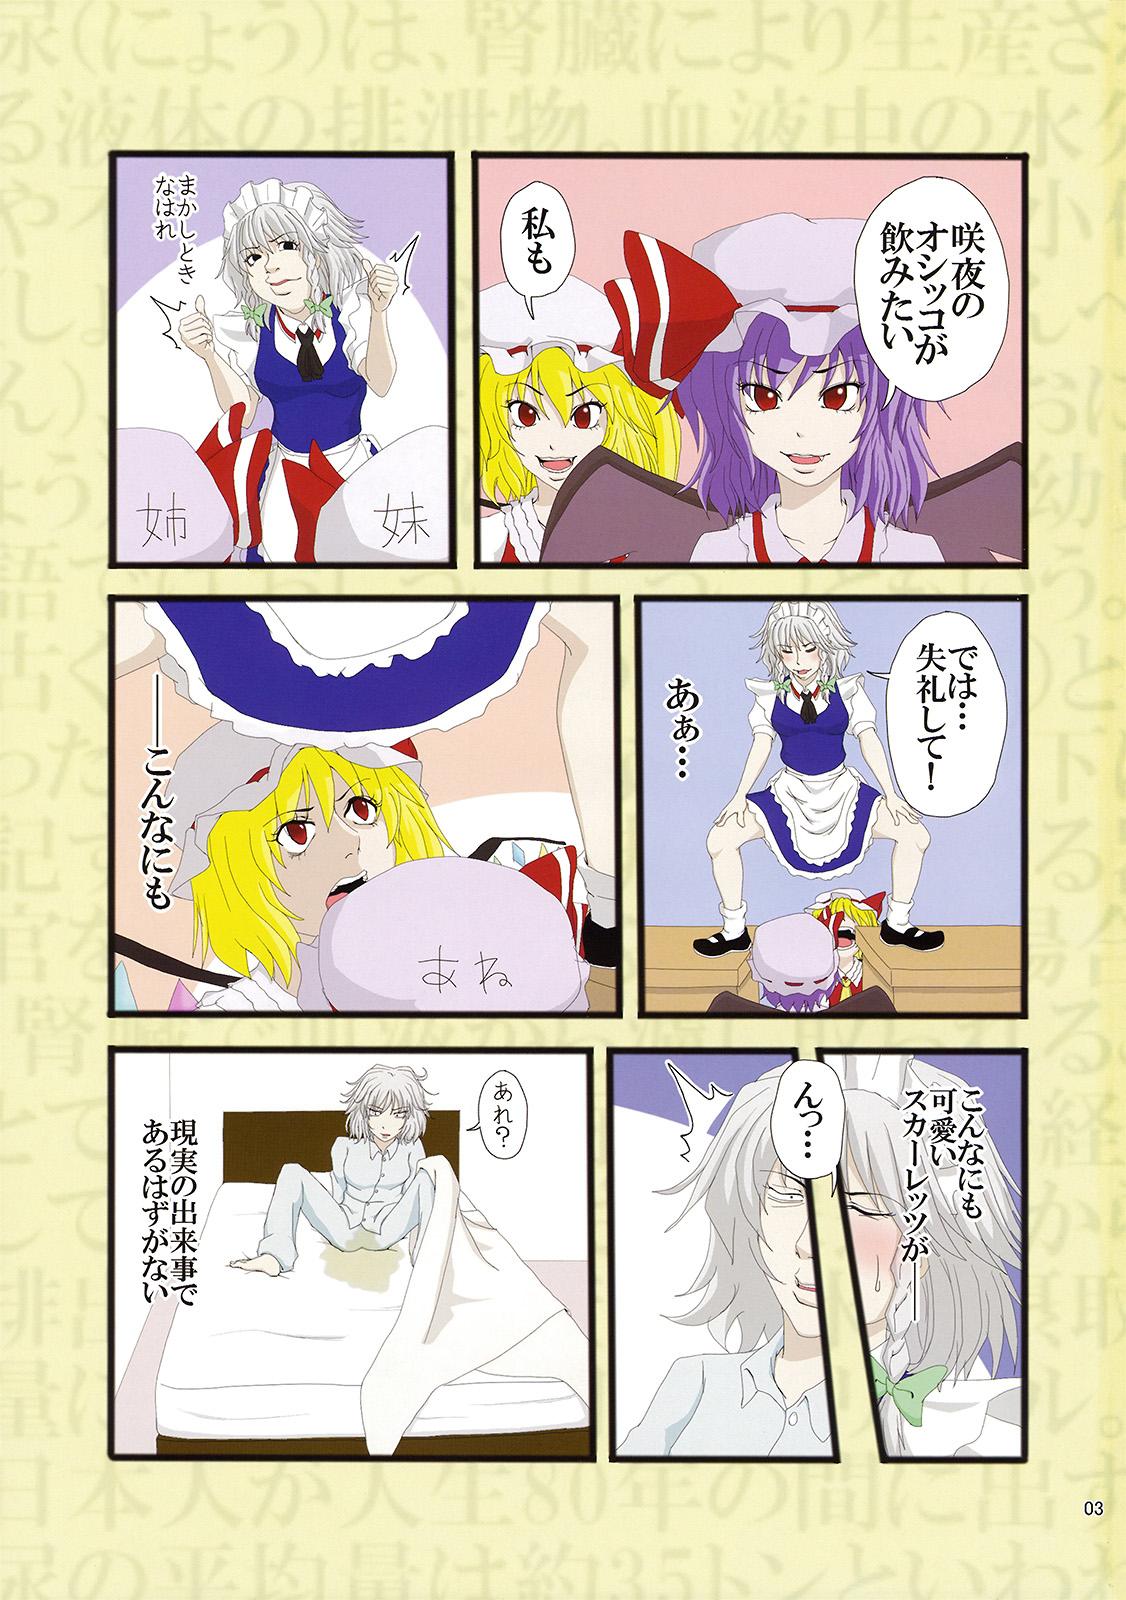 Filipina 完全で瀟洒な尿者 - Touhou project Gostosas - Page 3